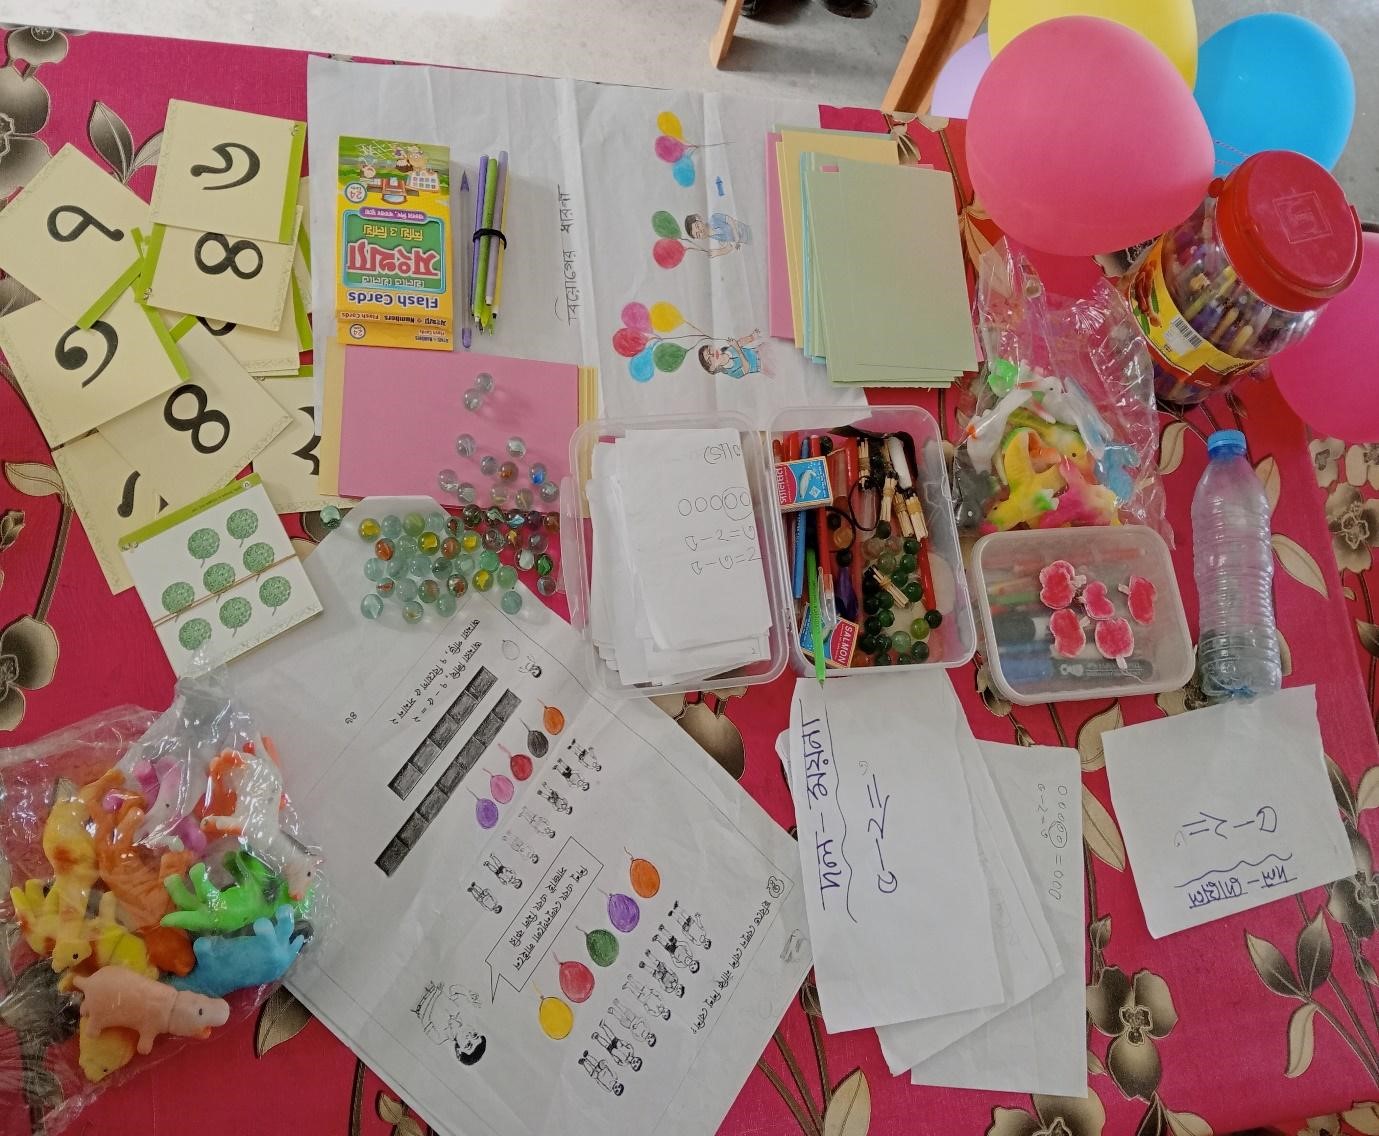 A table with creative materials from a 3MPower workshop with teachers.